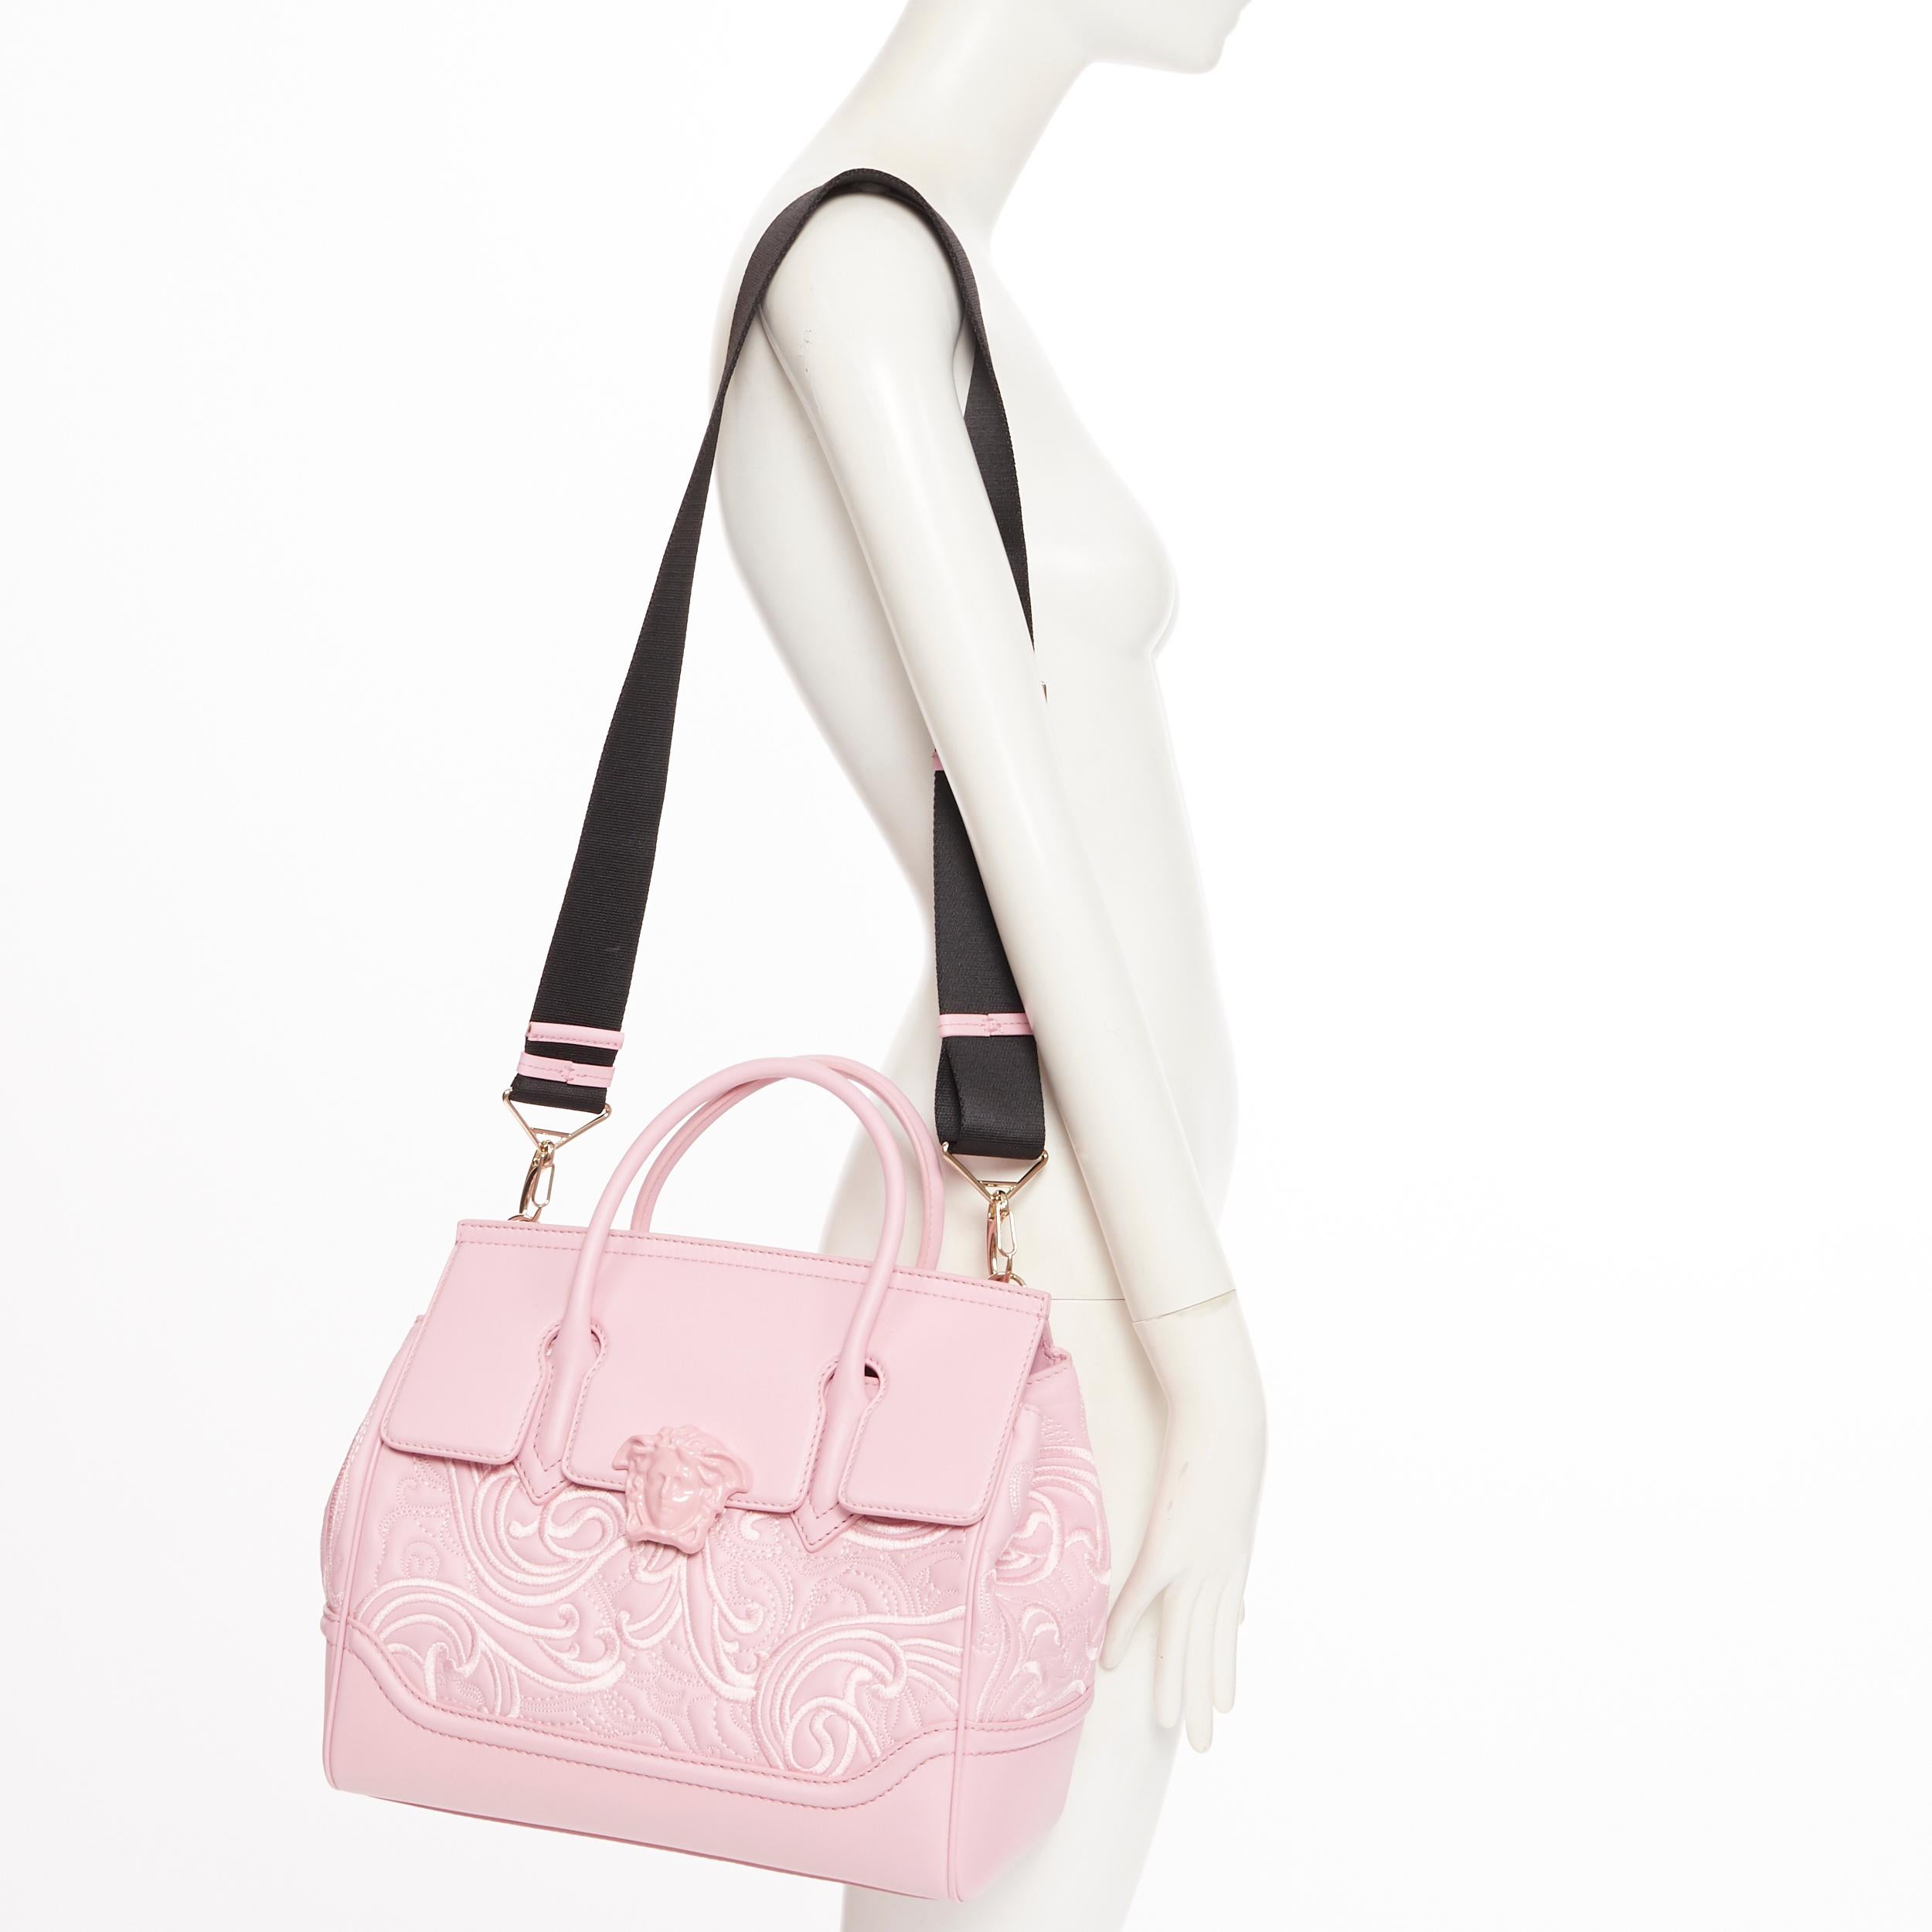 new VERSACE Palazzo Empire pink leather embroidery Medusa flap shoulder bag
Brand: Versace
Designer: Donatella Versace
Model Name / Style: Palazzo Empire
Material: Leather; calf leather
Color: Pink
Pattern: Abstract; baroque floral
Lining material: